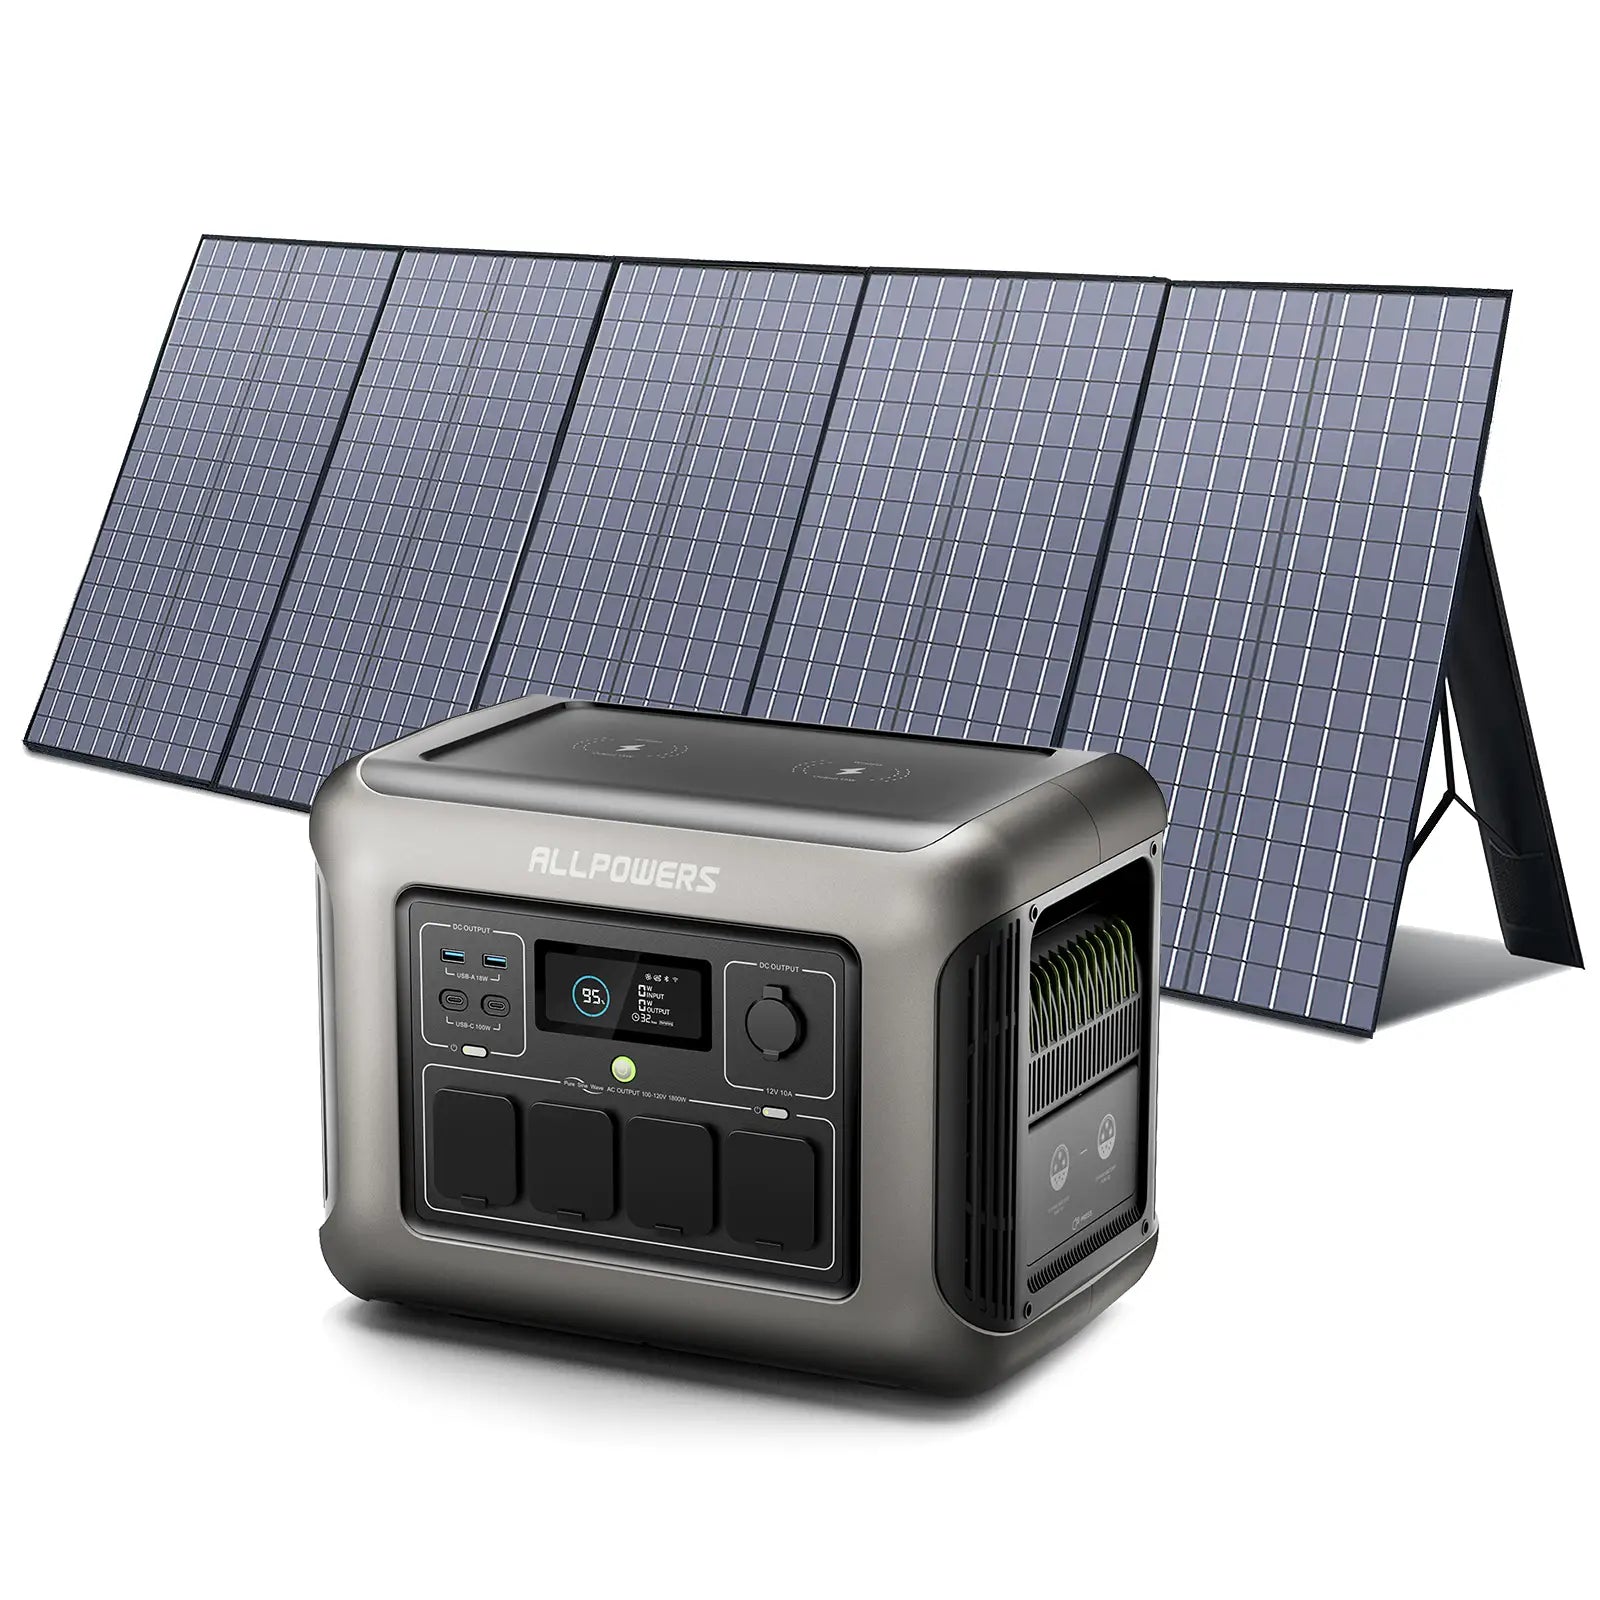 ALLPOWERS R1500 Portable Home Backup Power Station 1800W 1152Wh LiFeP04 Battery